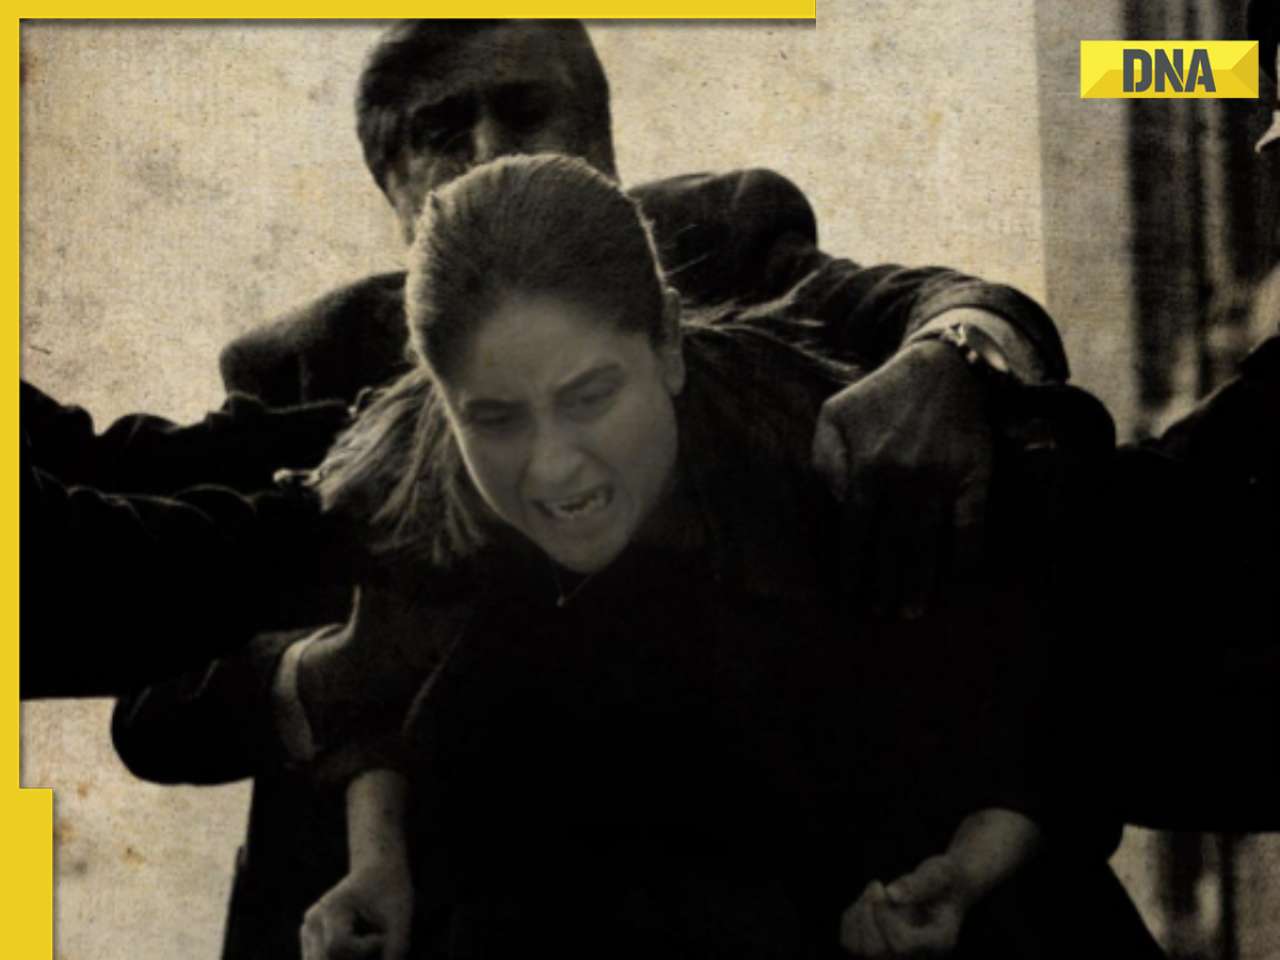 The Buckingham Murders: Kareena Kapoor is held forcibly by cops in first look poster, fans say 'National Award loading'